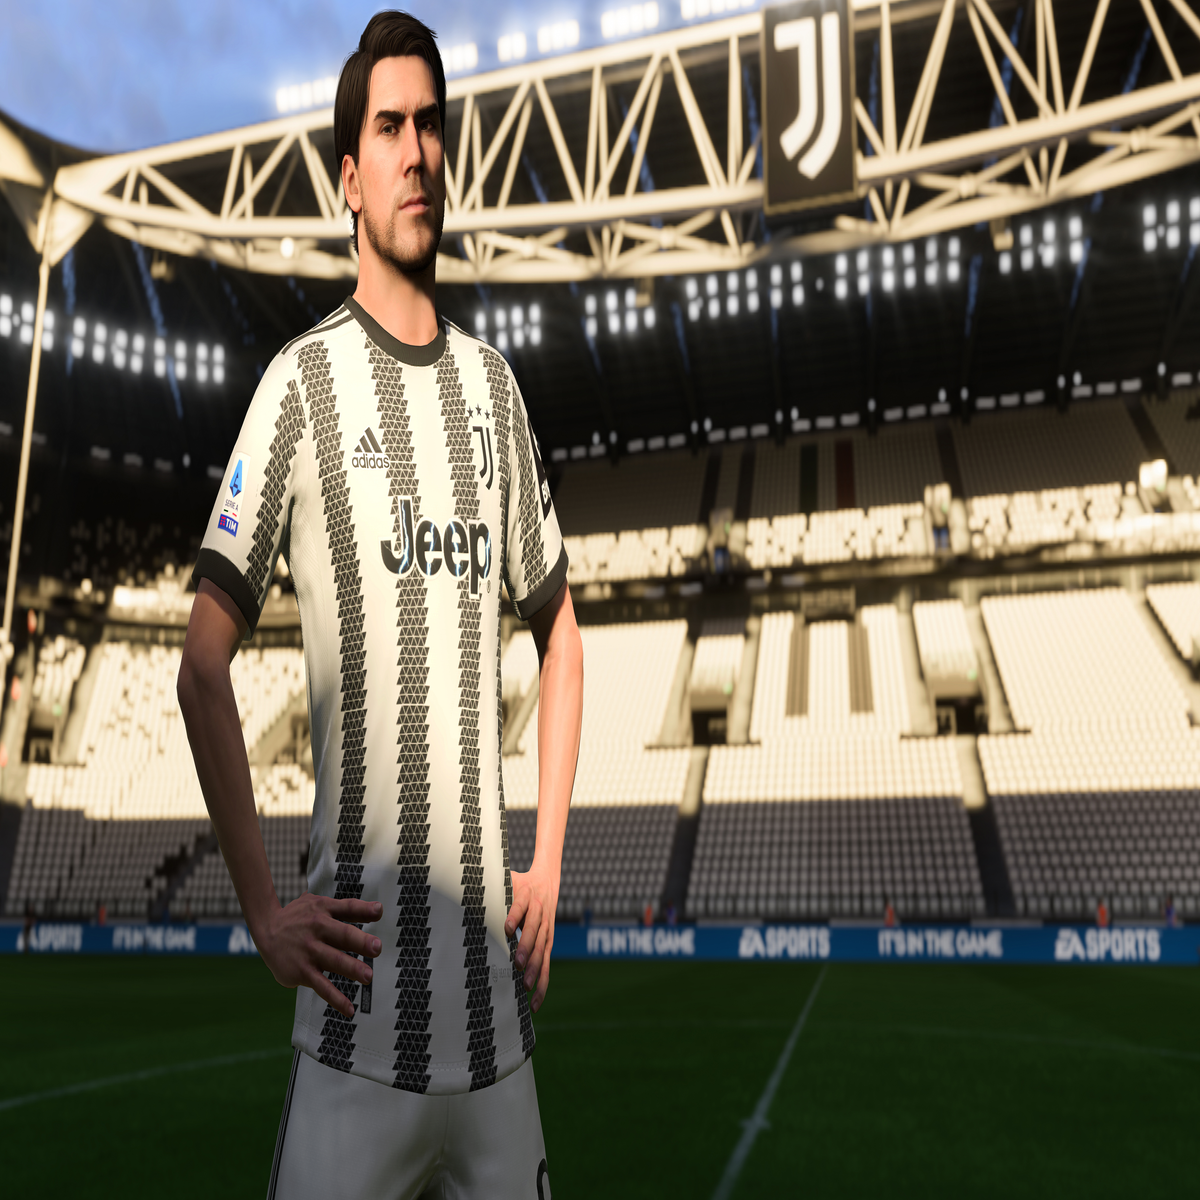 Juventus EA FC 24: All leaked possible player ratings